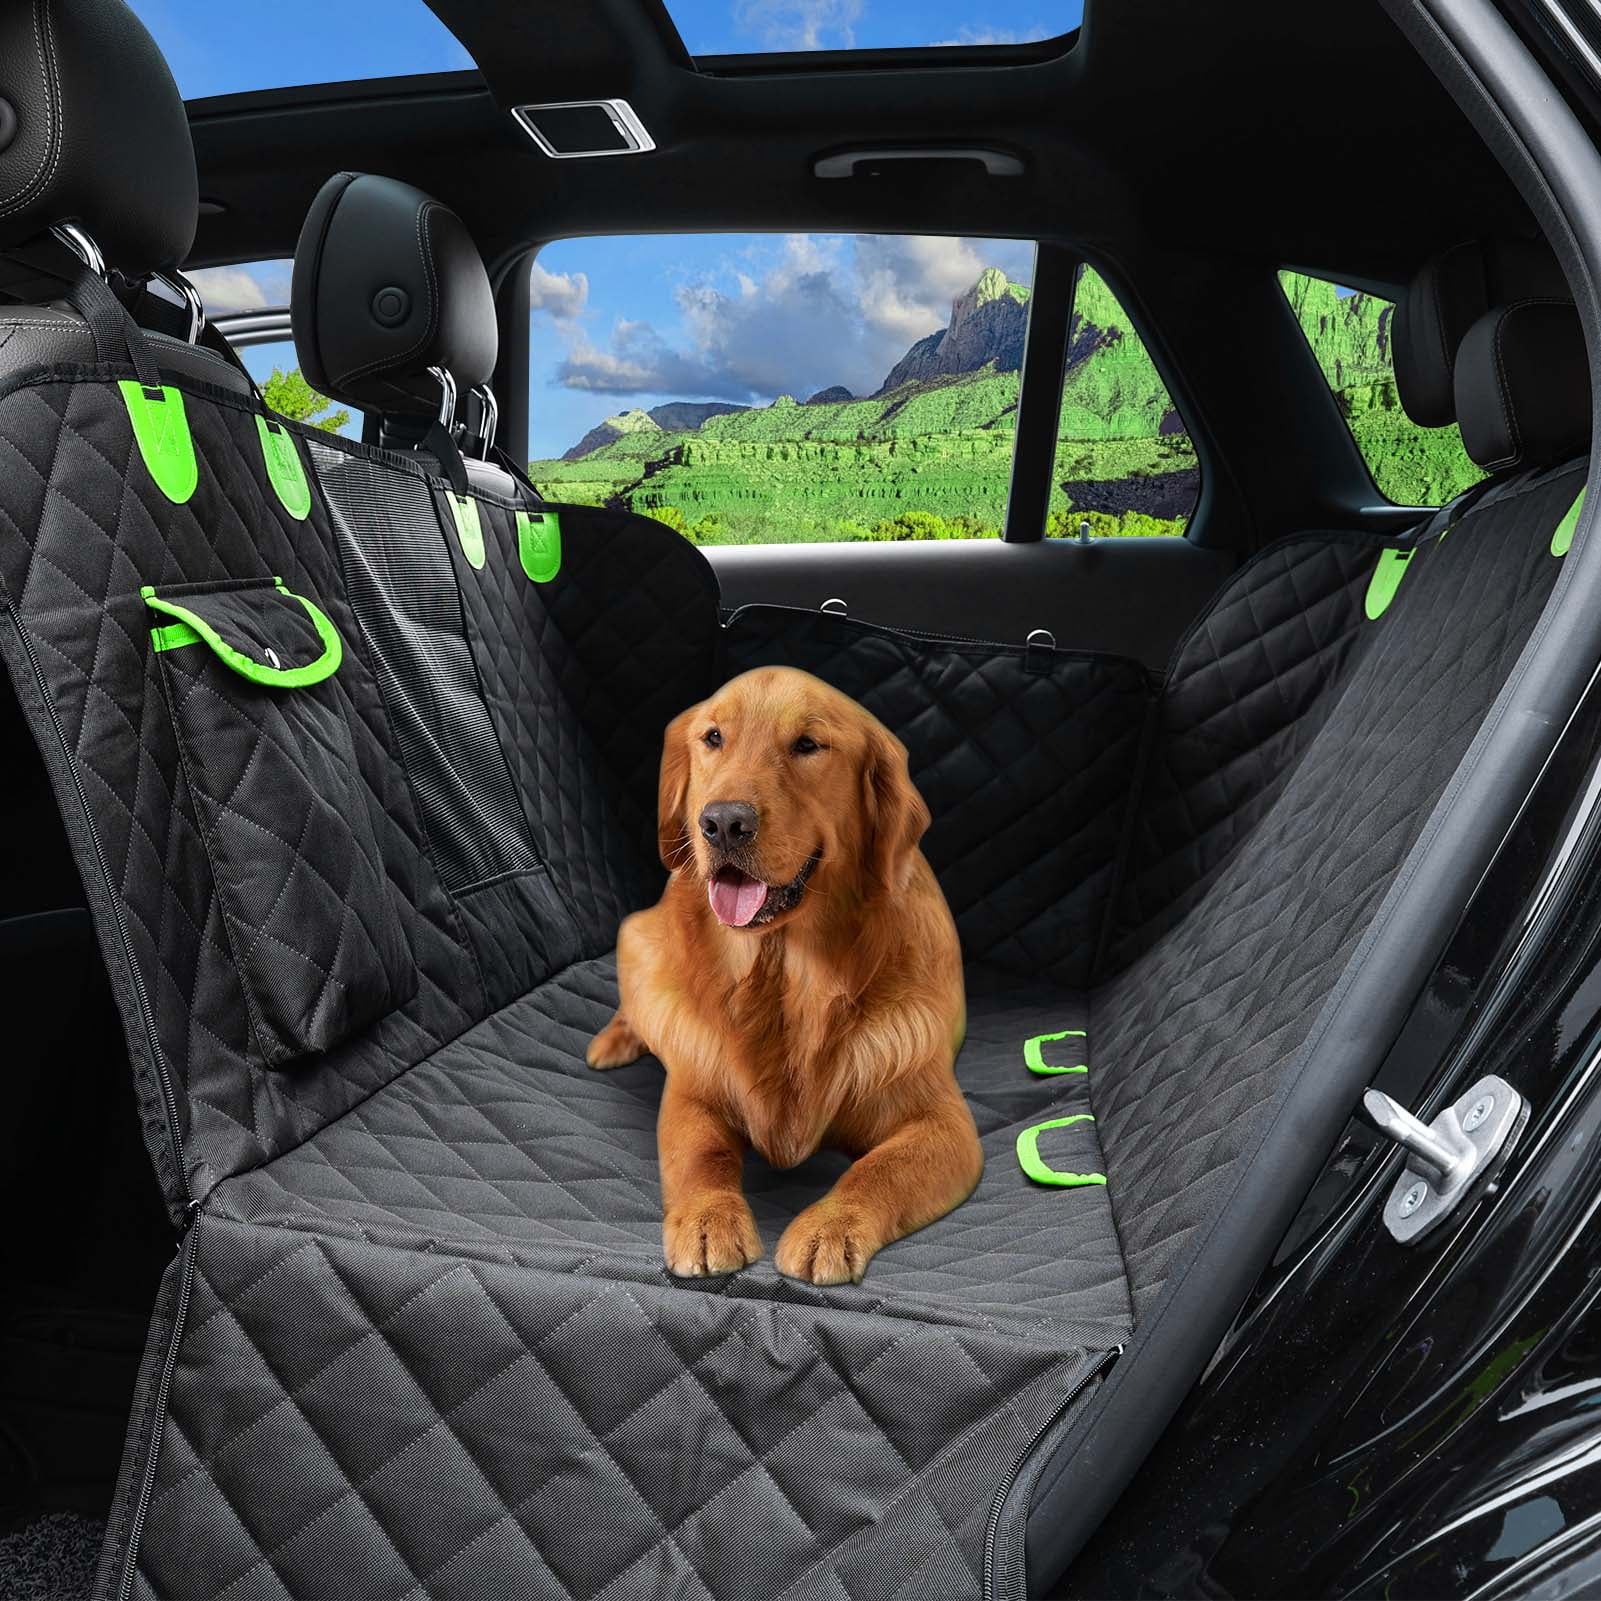 Dog Hammock for Car with Mesh Window, 600D Oxford Waterproof